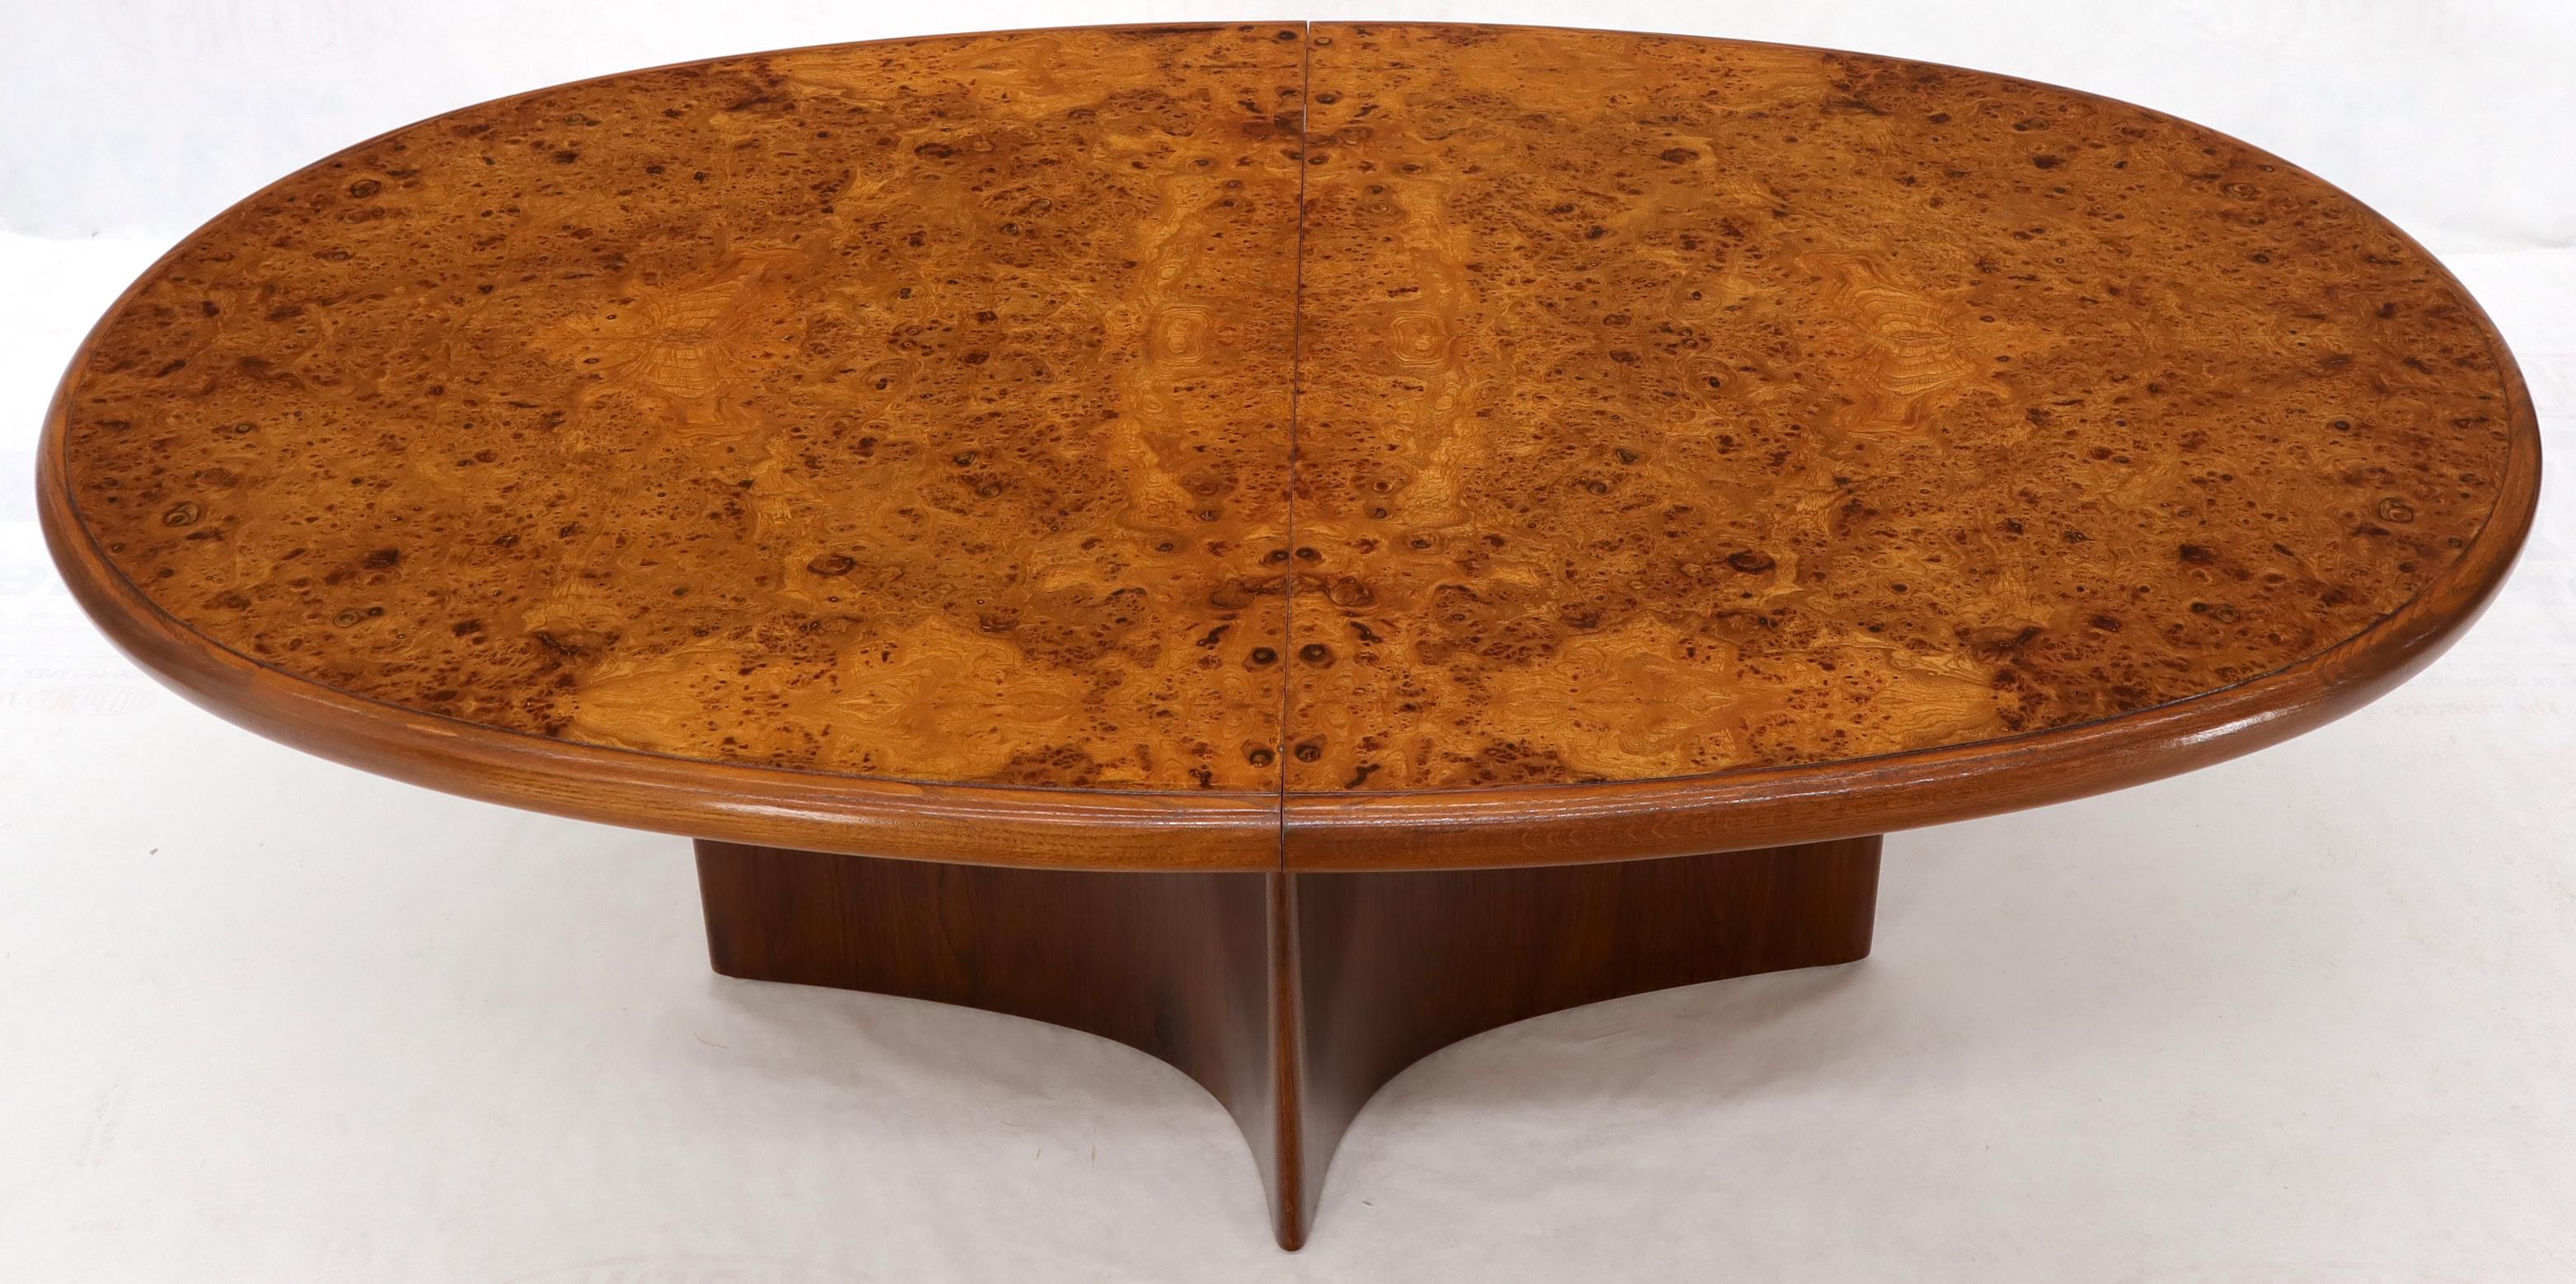 Lacquered Vladimir Kagan Dimond Base Oval Burl Wood Top Dining Conference Table 